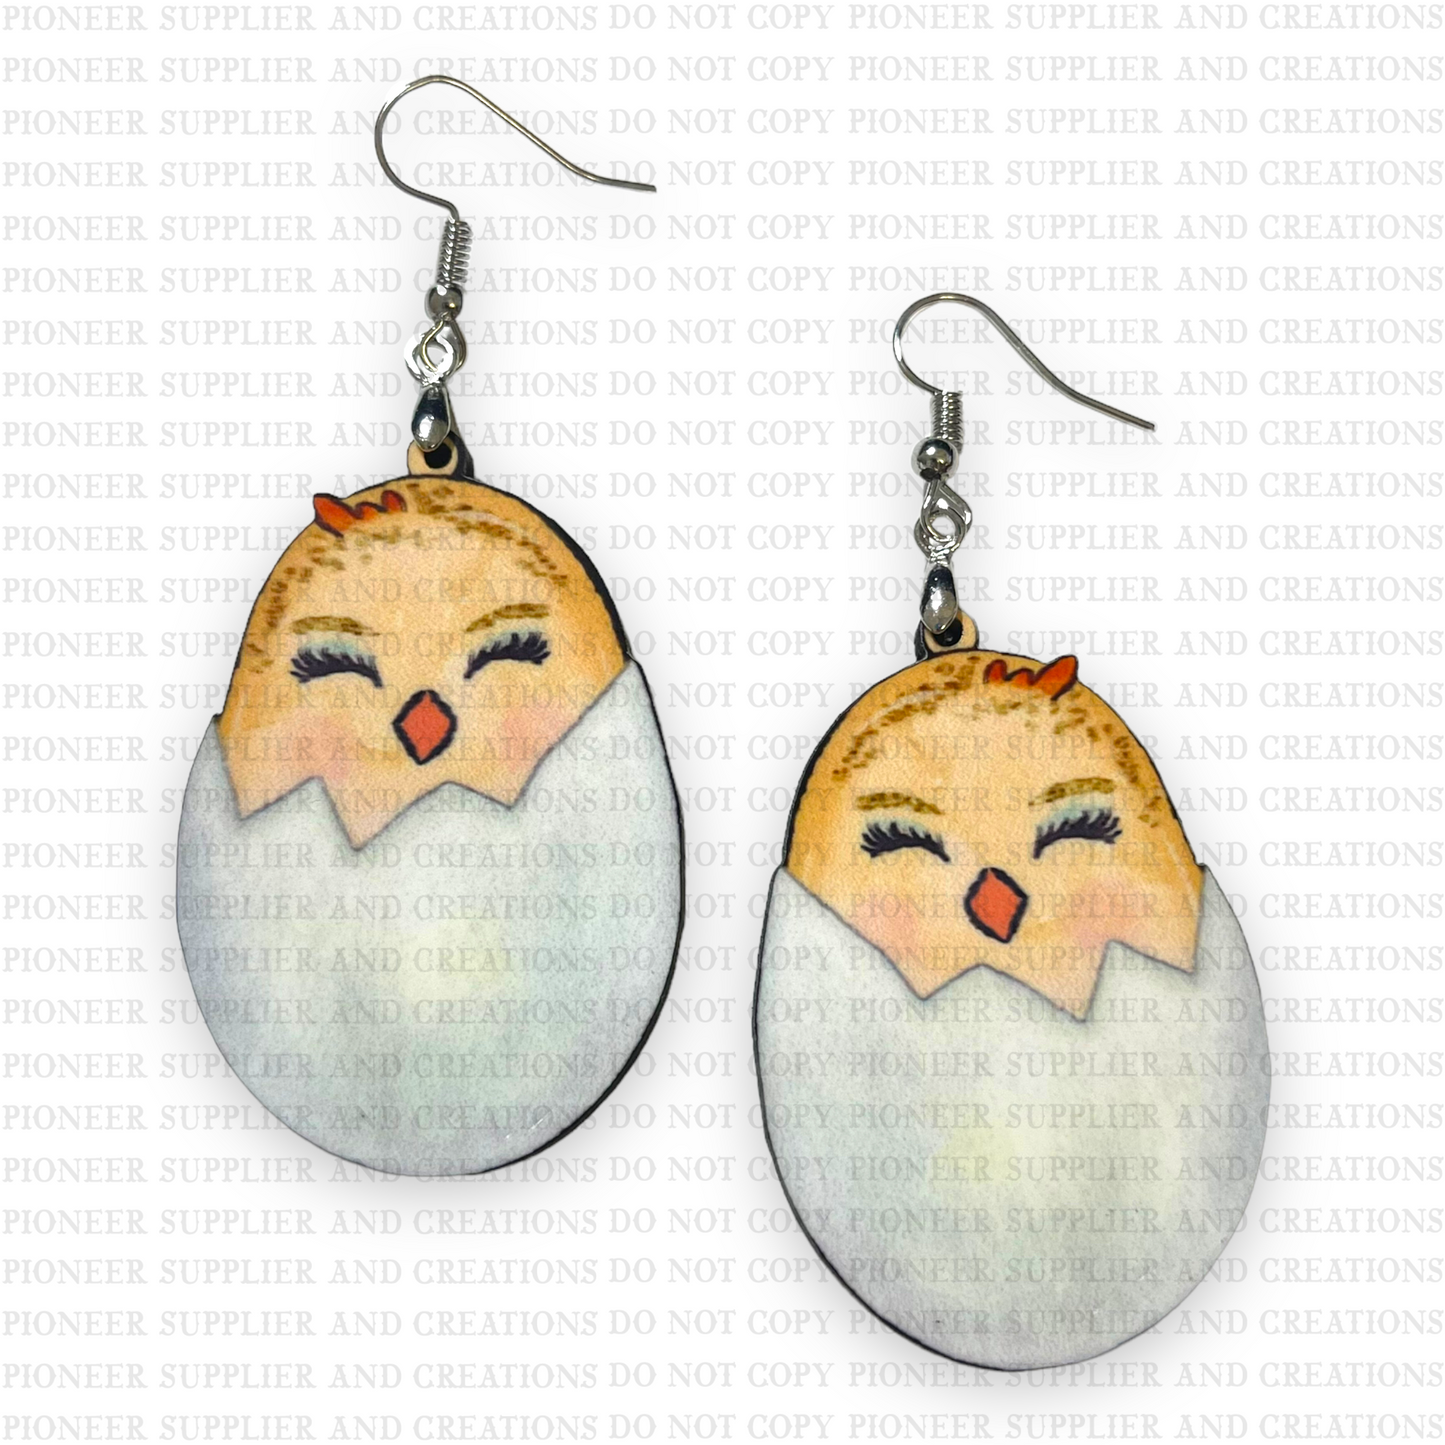 Chick in Egg Shaped Earring Sublimation Blanks | Tina Braddock